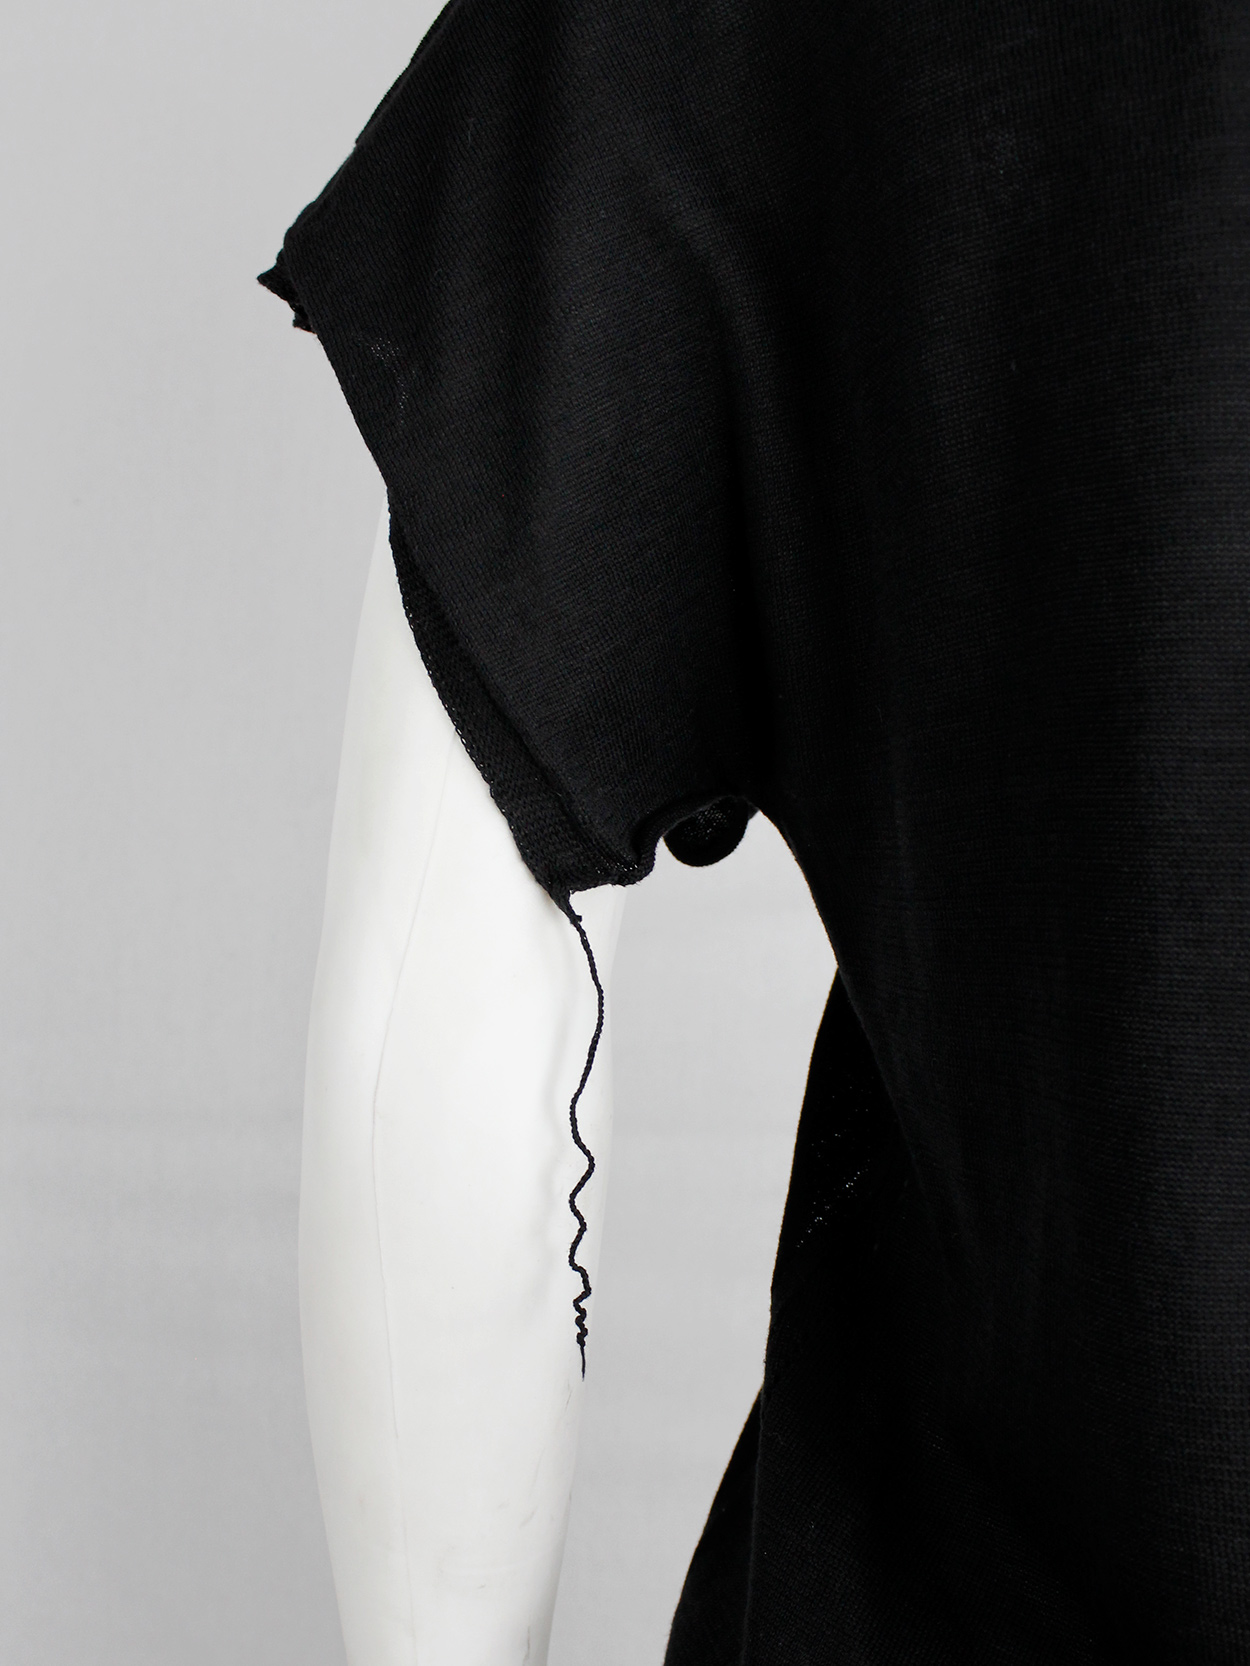 Maison Martin Margiela black t-shirt with cut open sleeves and hanging